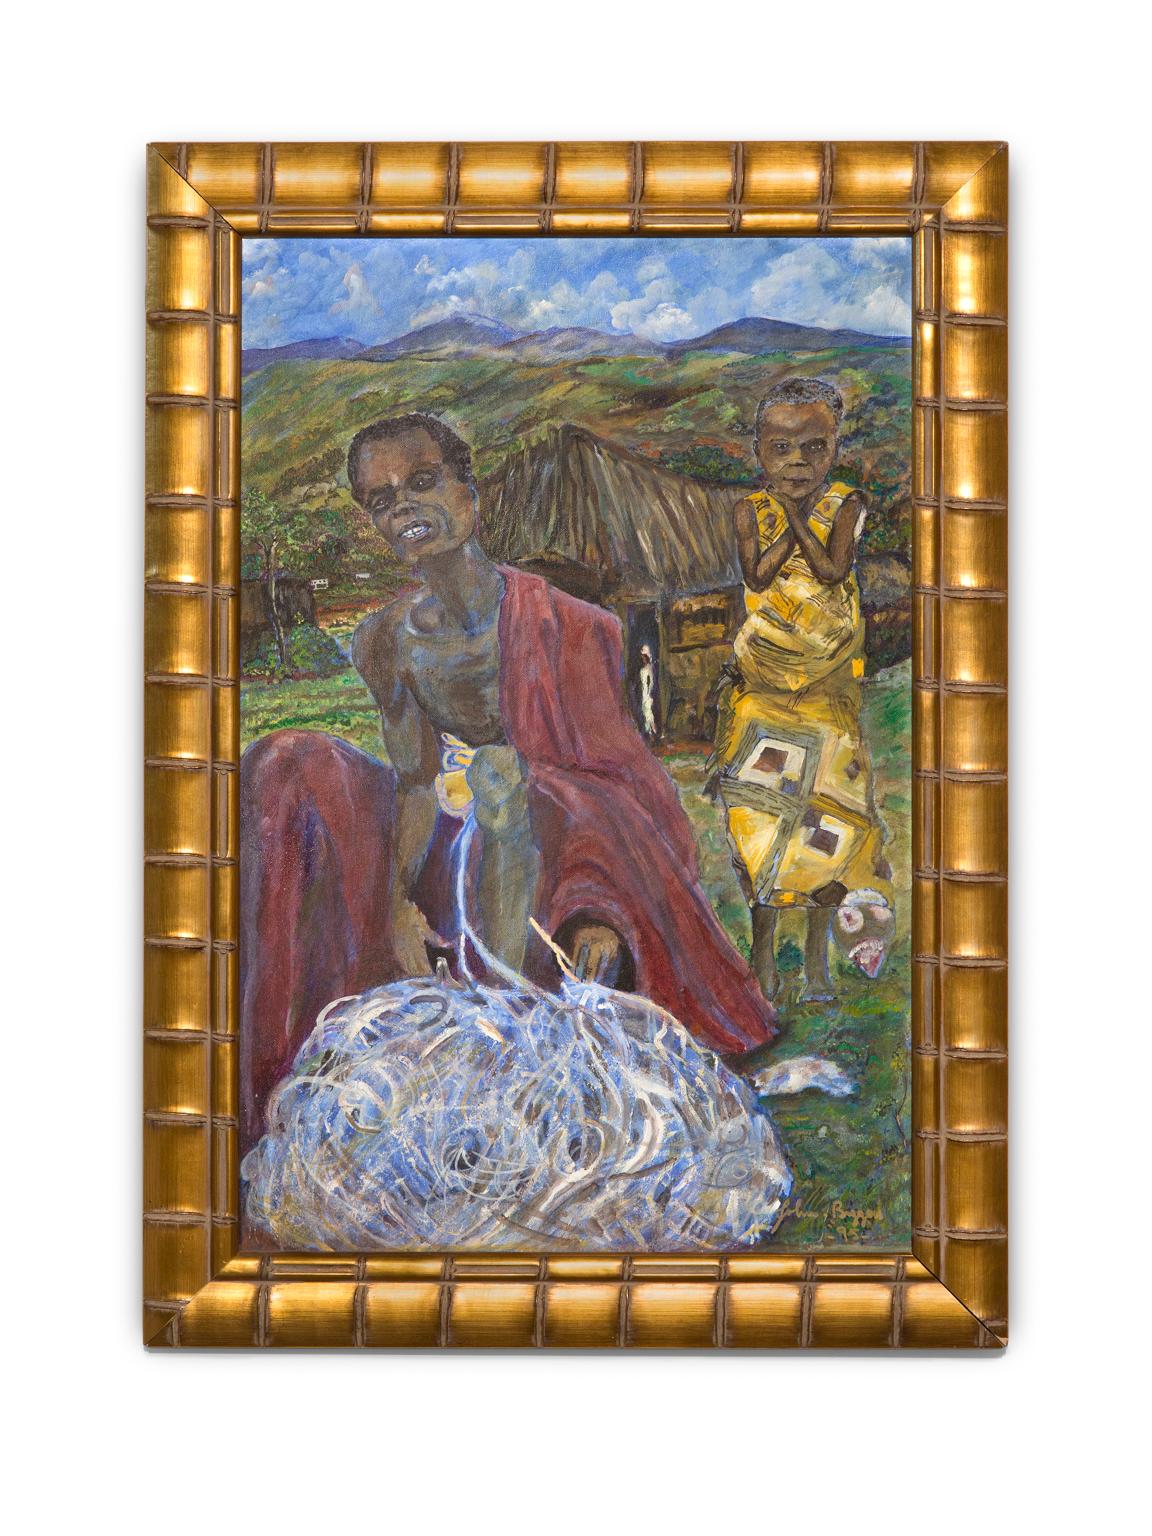 John Biggers Figurative Painting - "Slice of Cotton Harvest" Figurative, Outdoors, Labor, Colors, Oil on Canvas